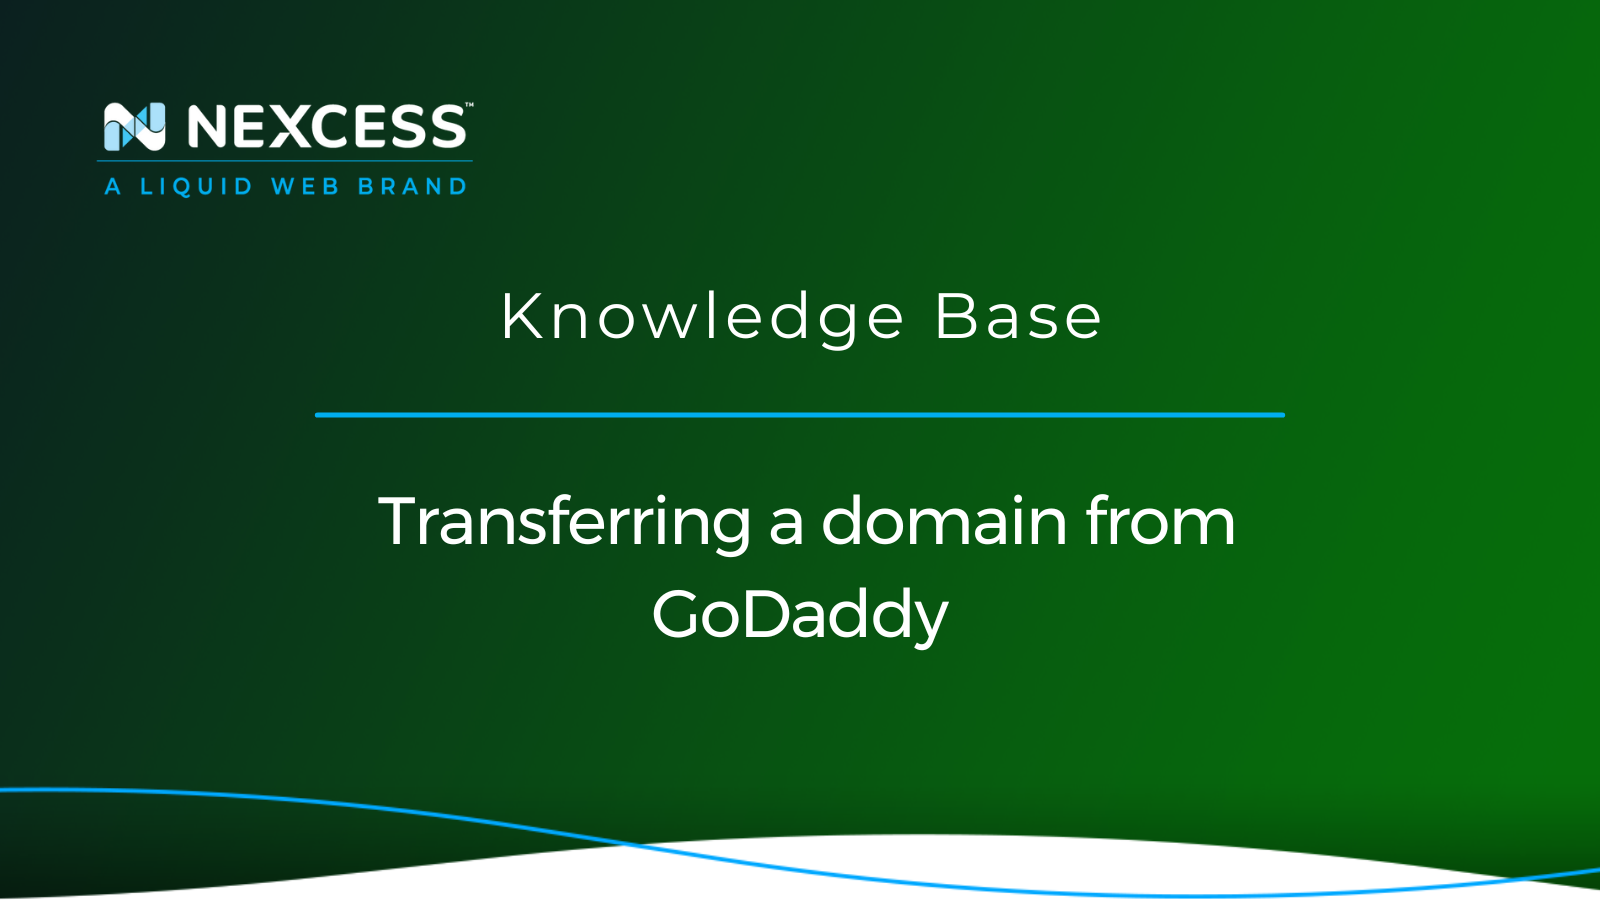  Transferring a domain from GoDaddy